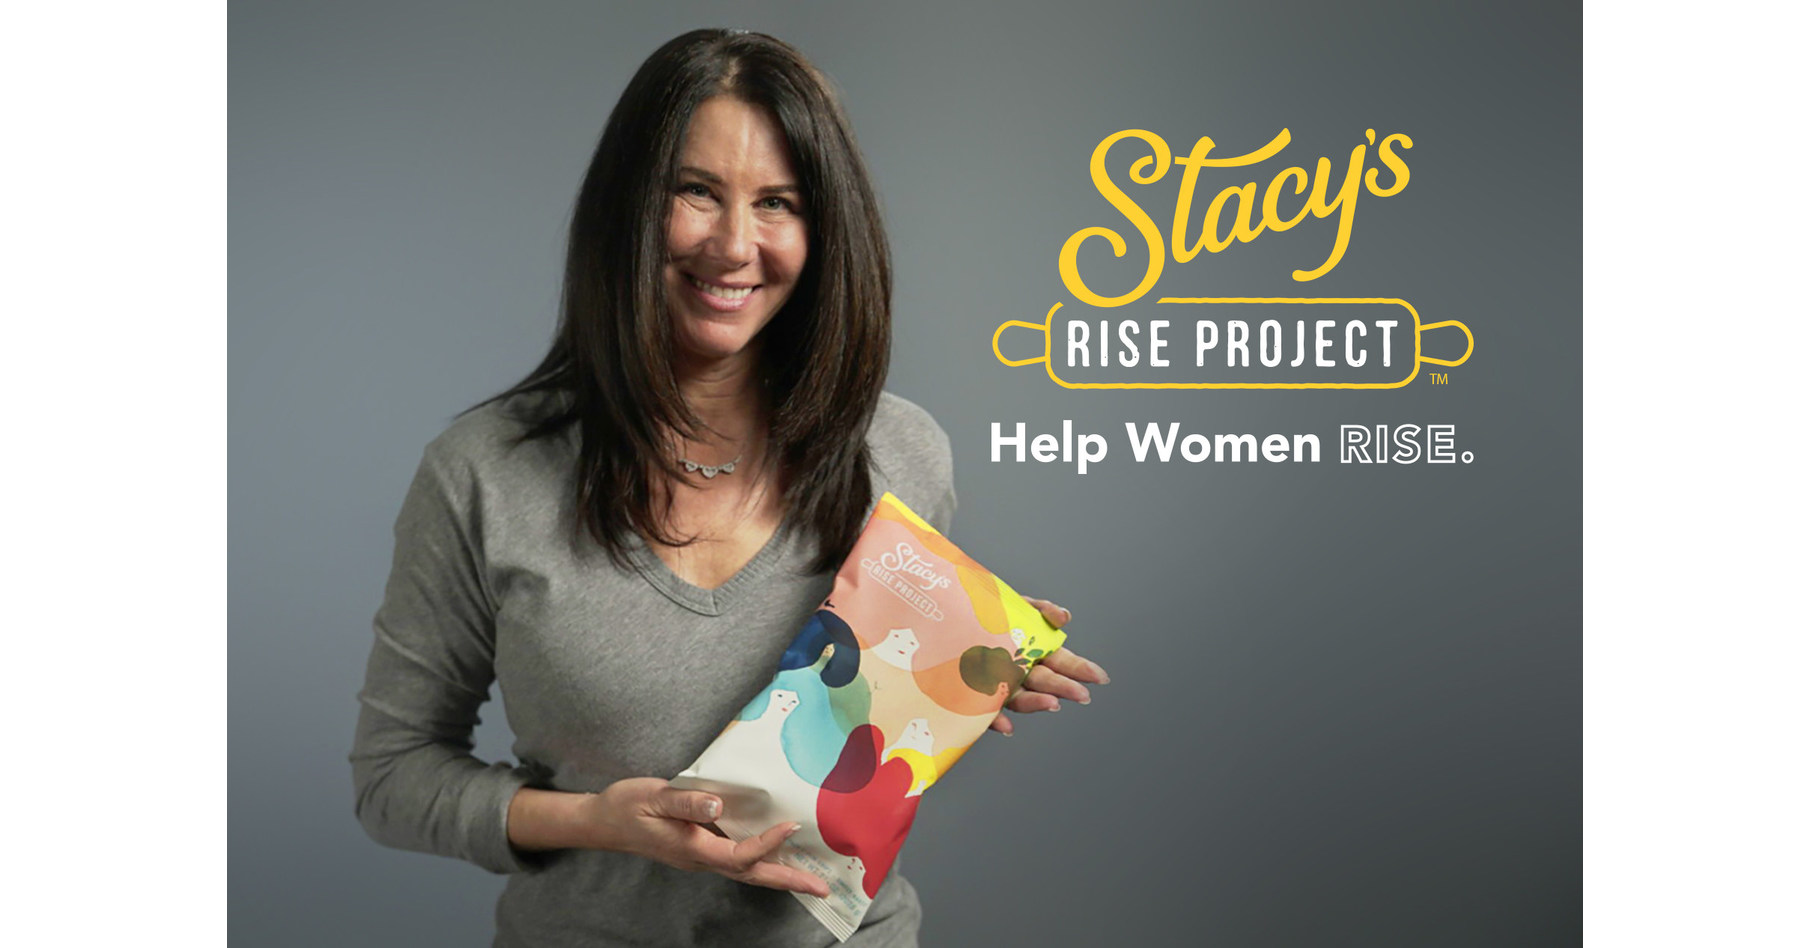 Stacy's To Award $200,000 In First-Ever 